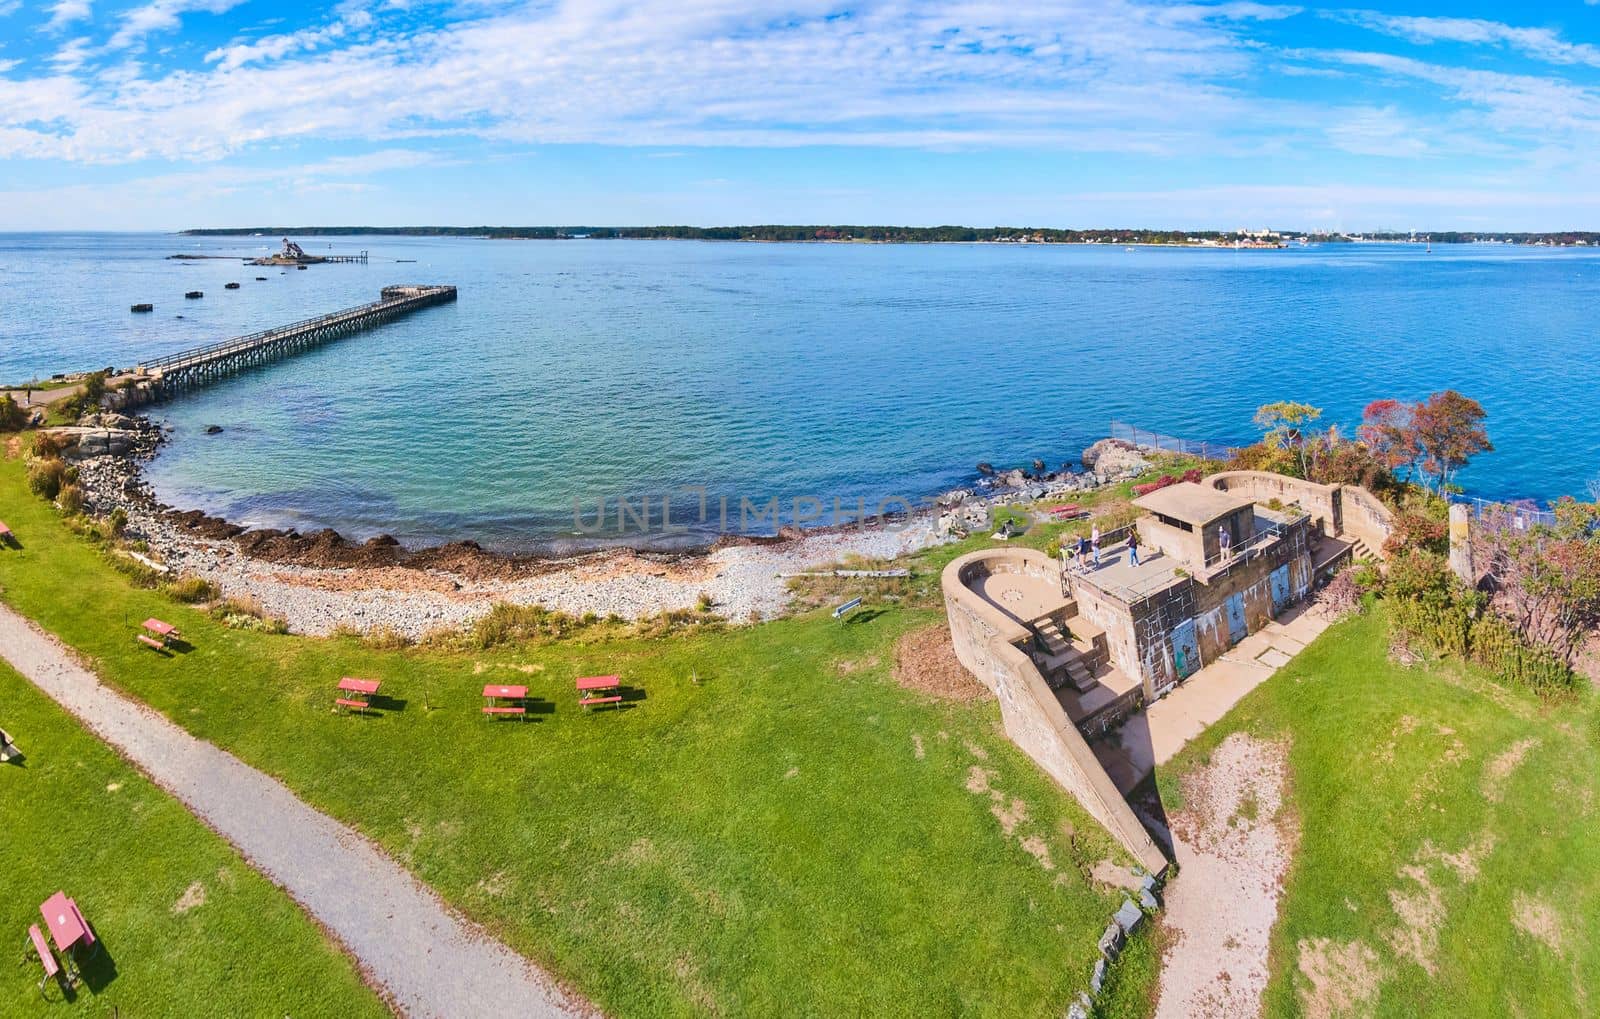 Old military fort on coast of Maine with pier and small island lighthouse in distance by njproductions